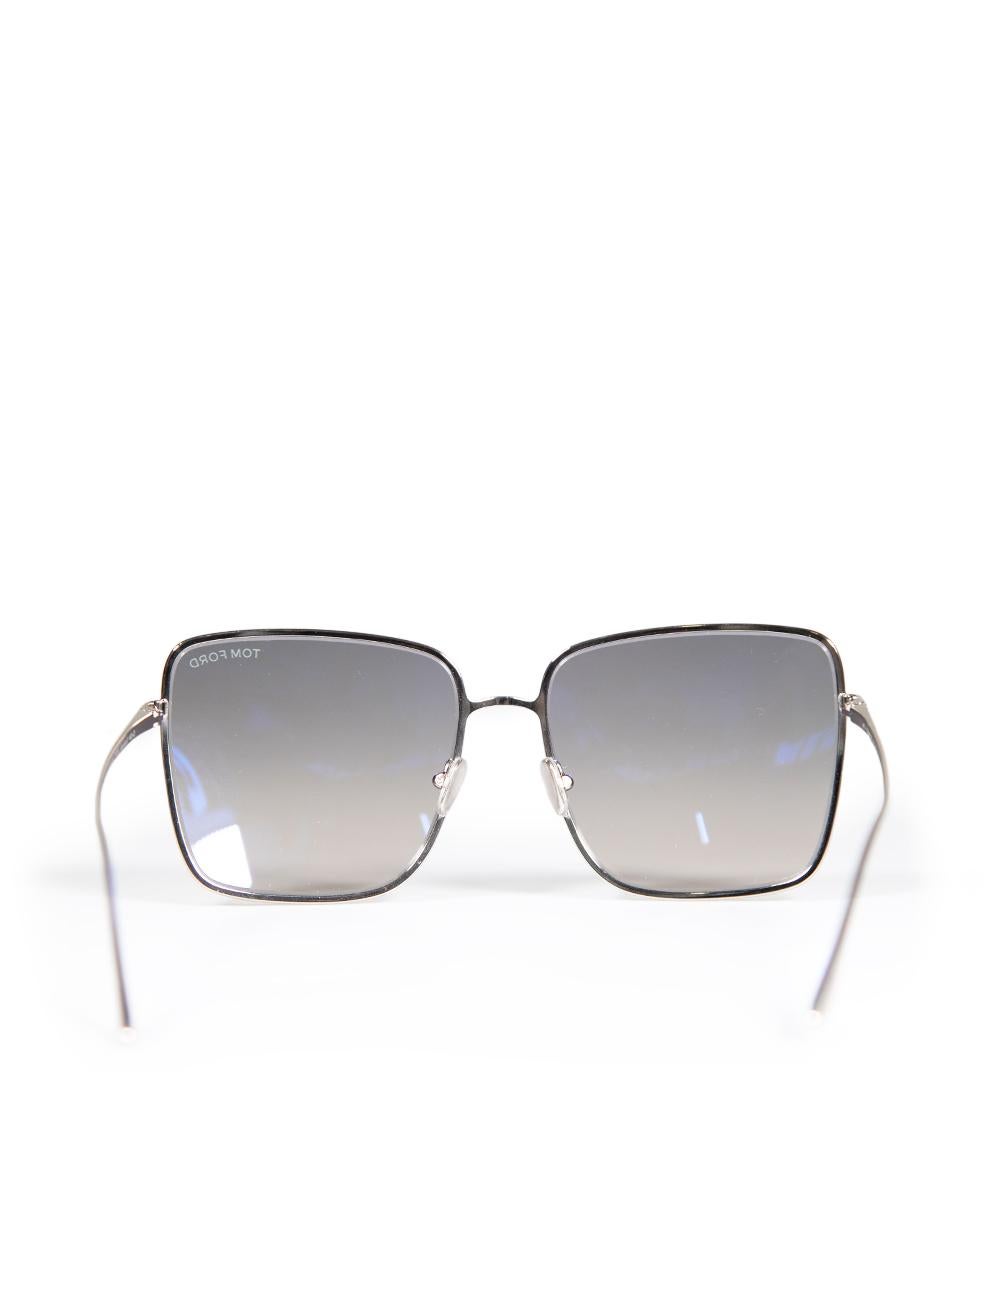 Women's Tom Ford Heather Grey Smoke Square Sunglasses For Sale